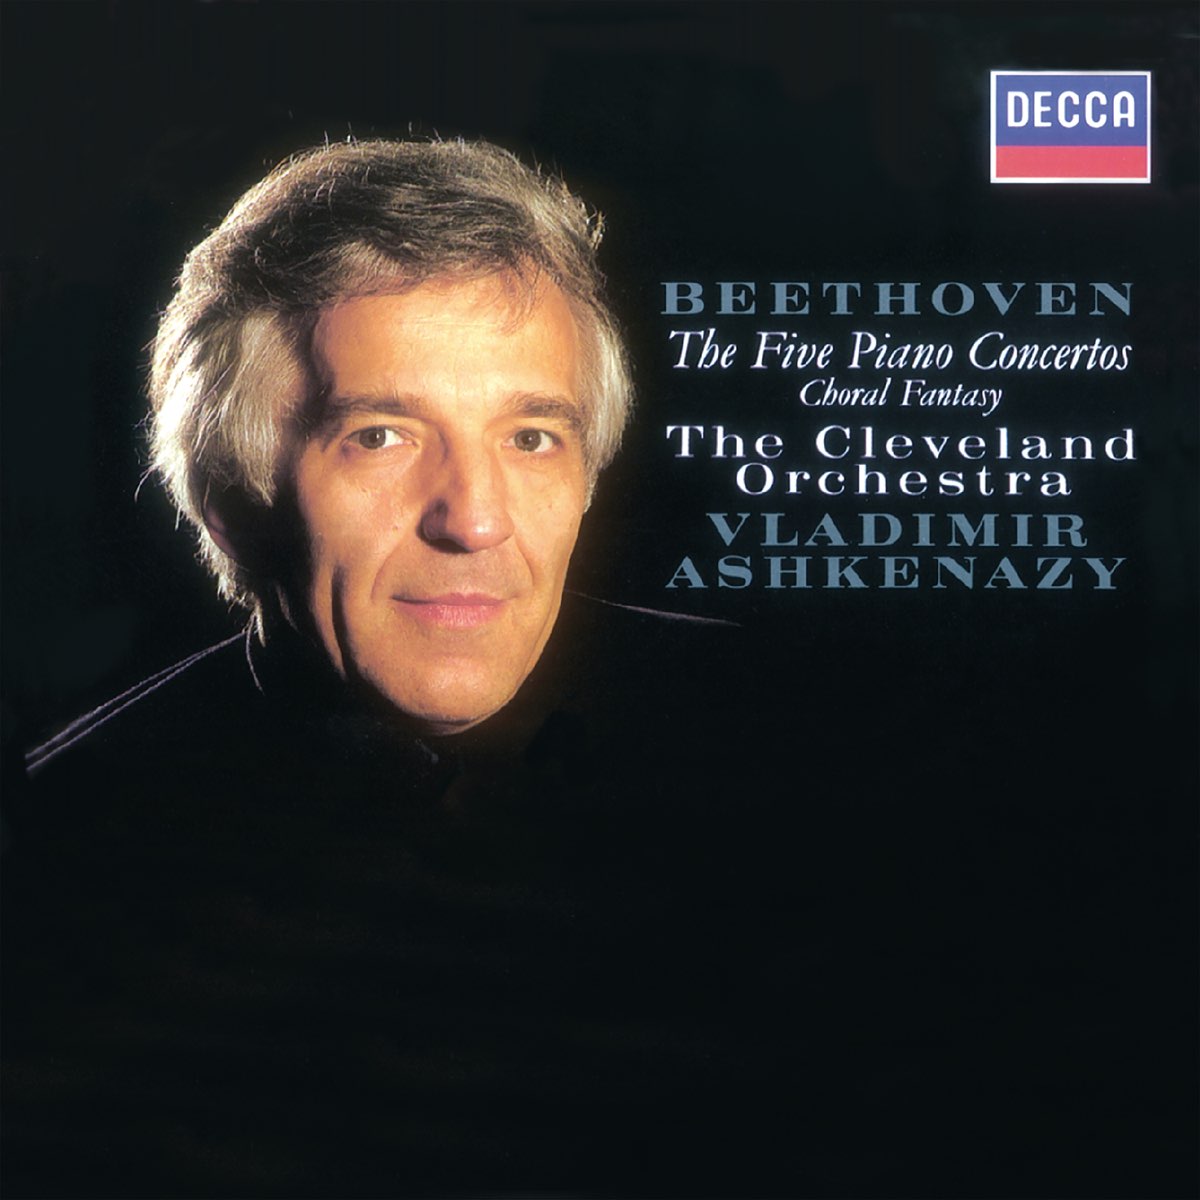 Beethoven: Piano Concertos Nos. 1-5; Choral Fantasia by Vladimir Ashkenazy  & The Cleveland Orchestra on Apple Music